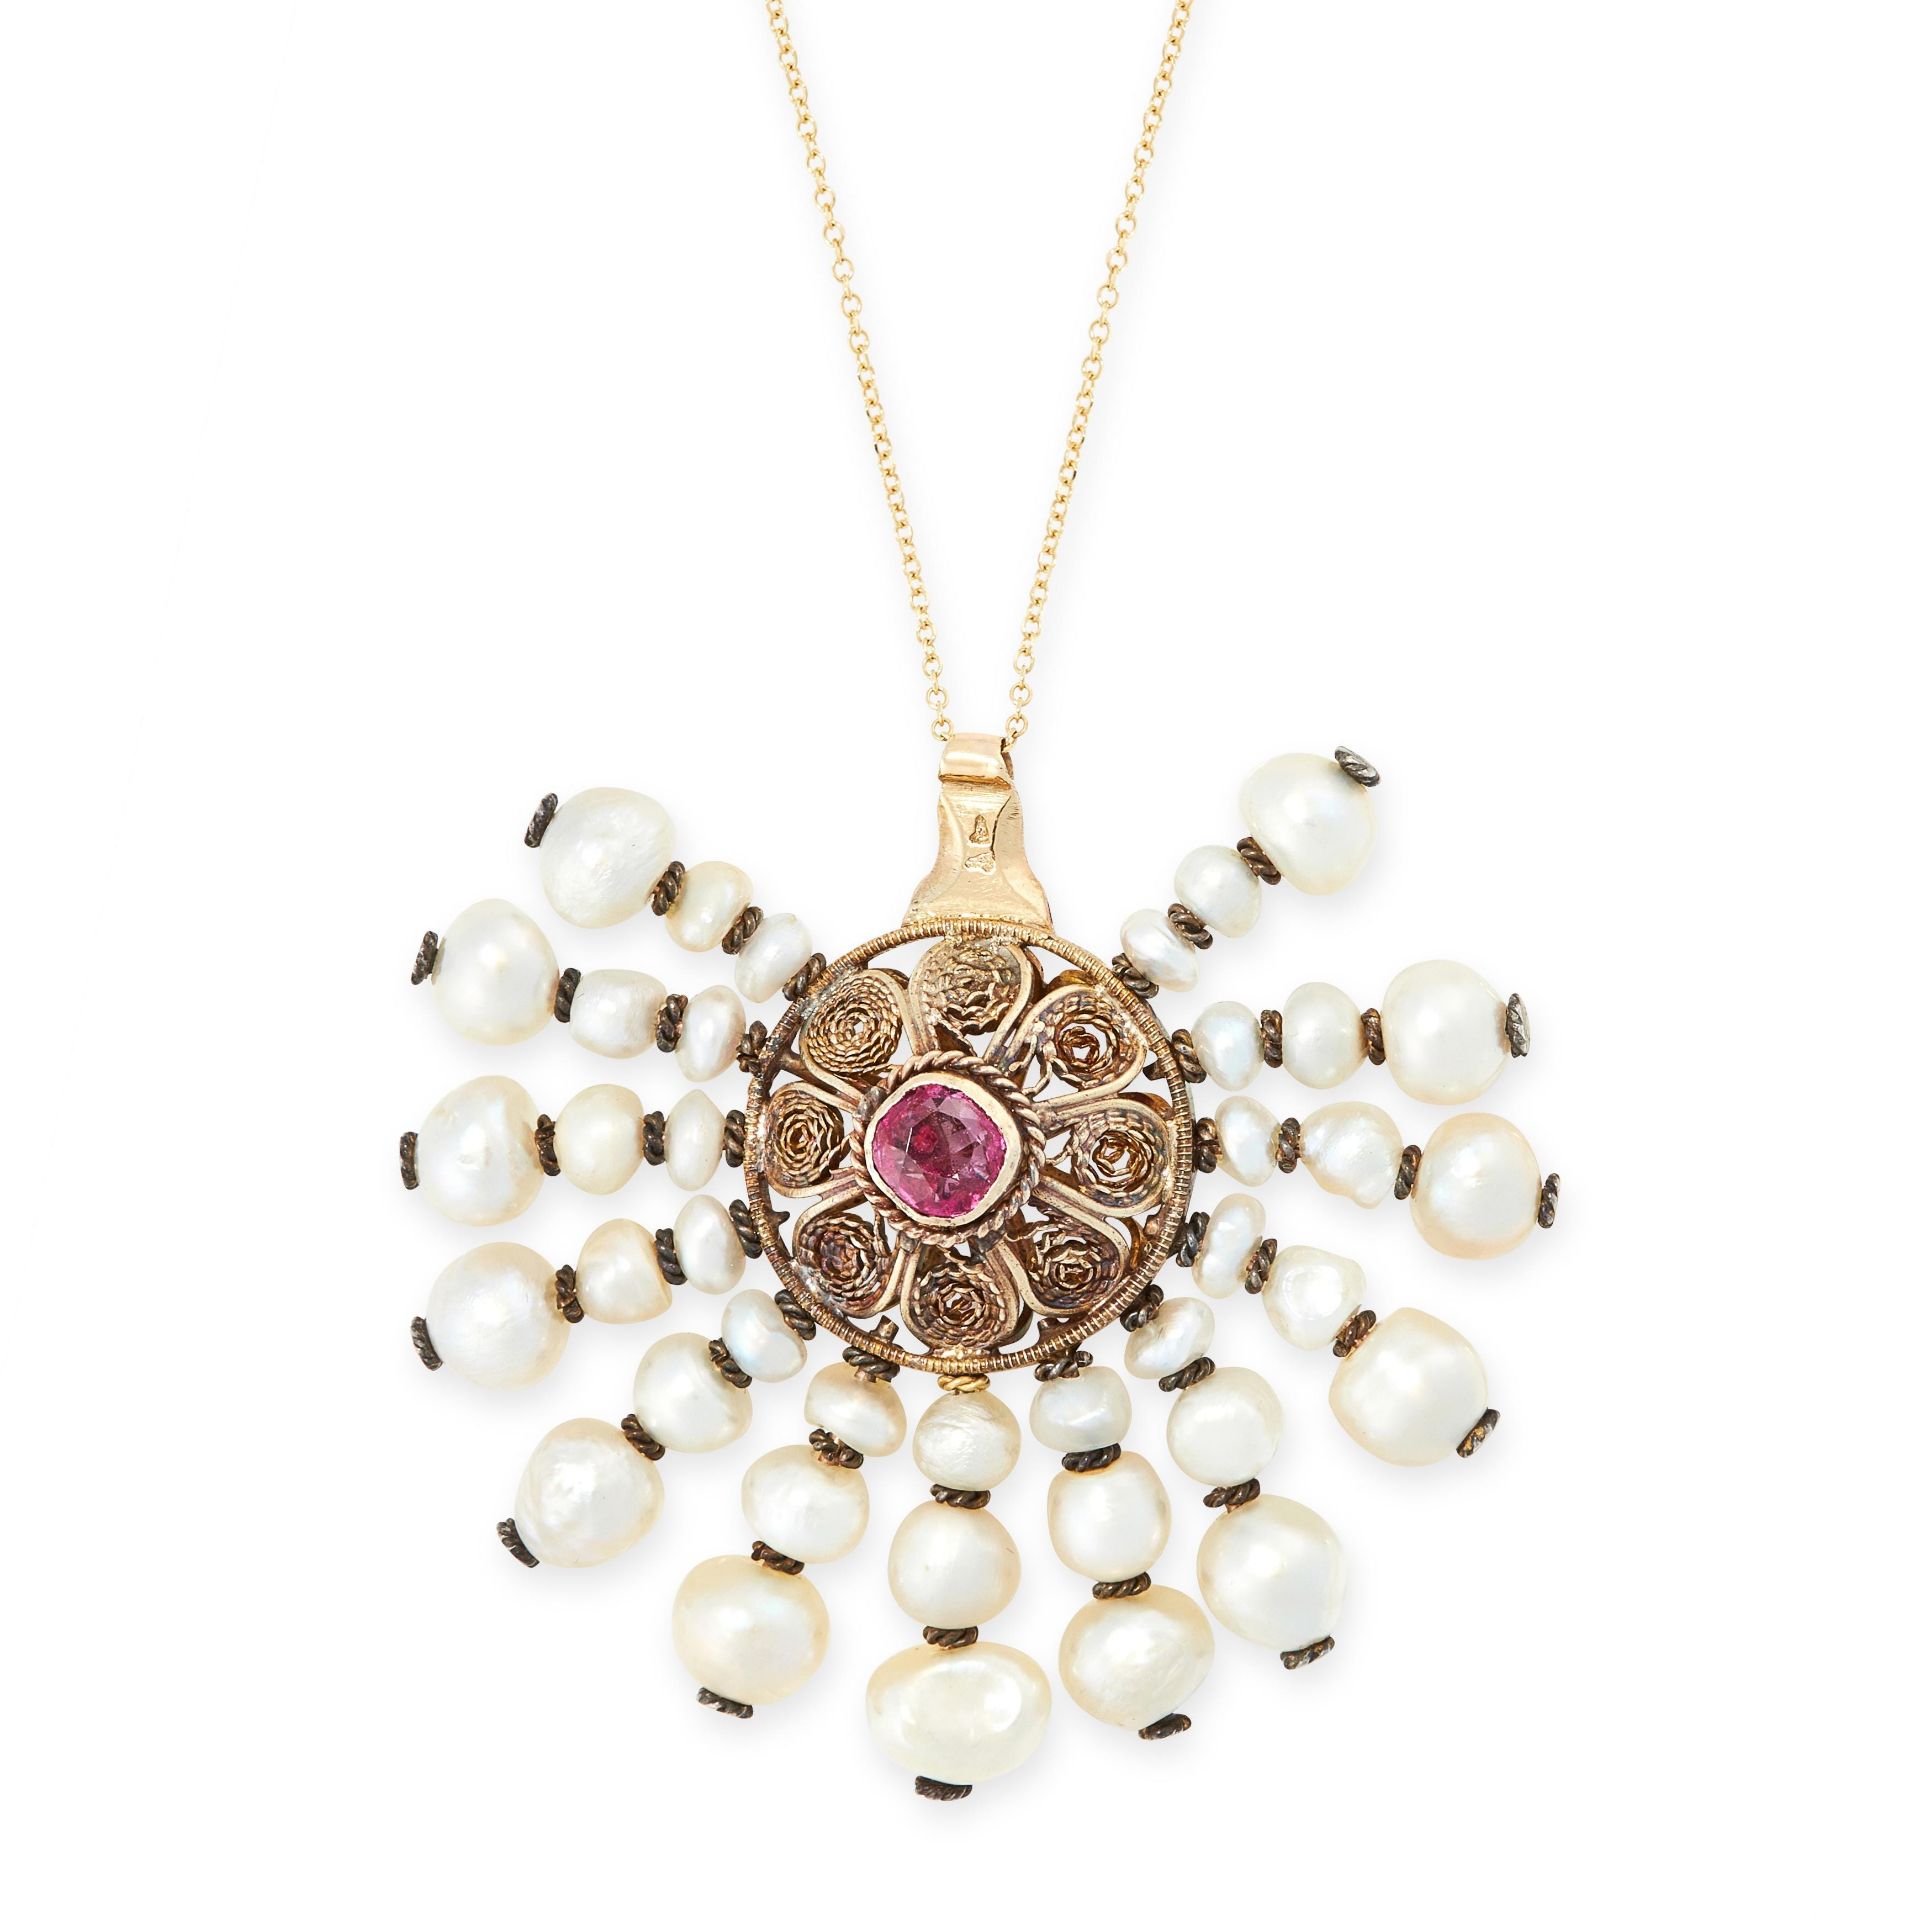 ANTIQUE NATURAL PEARL AND RUBY PENDANT in yellow gold, set with a cushion cut ruby, accented by rows